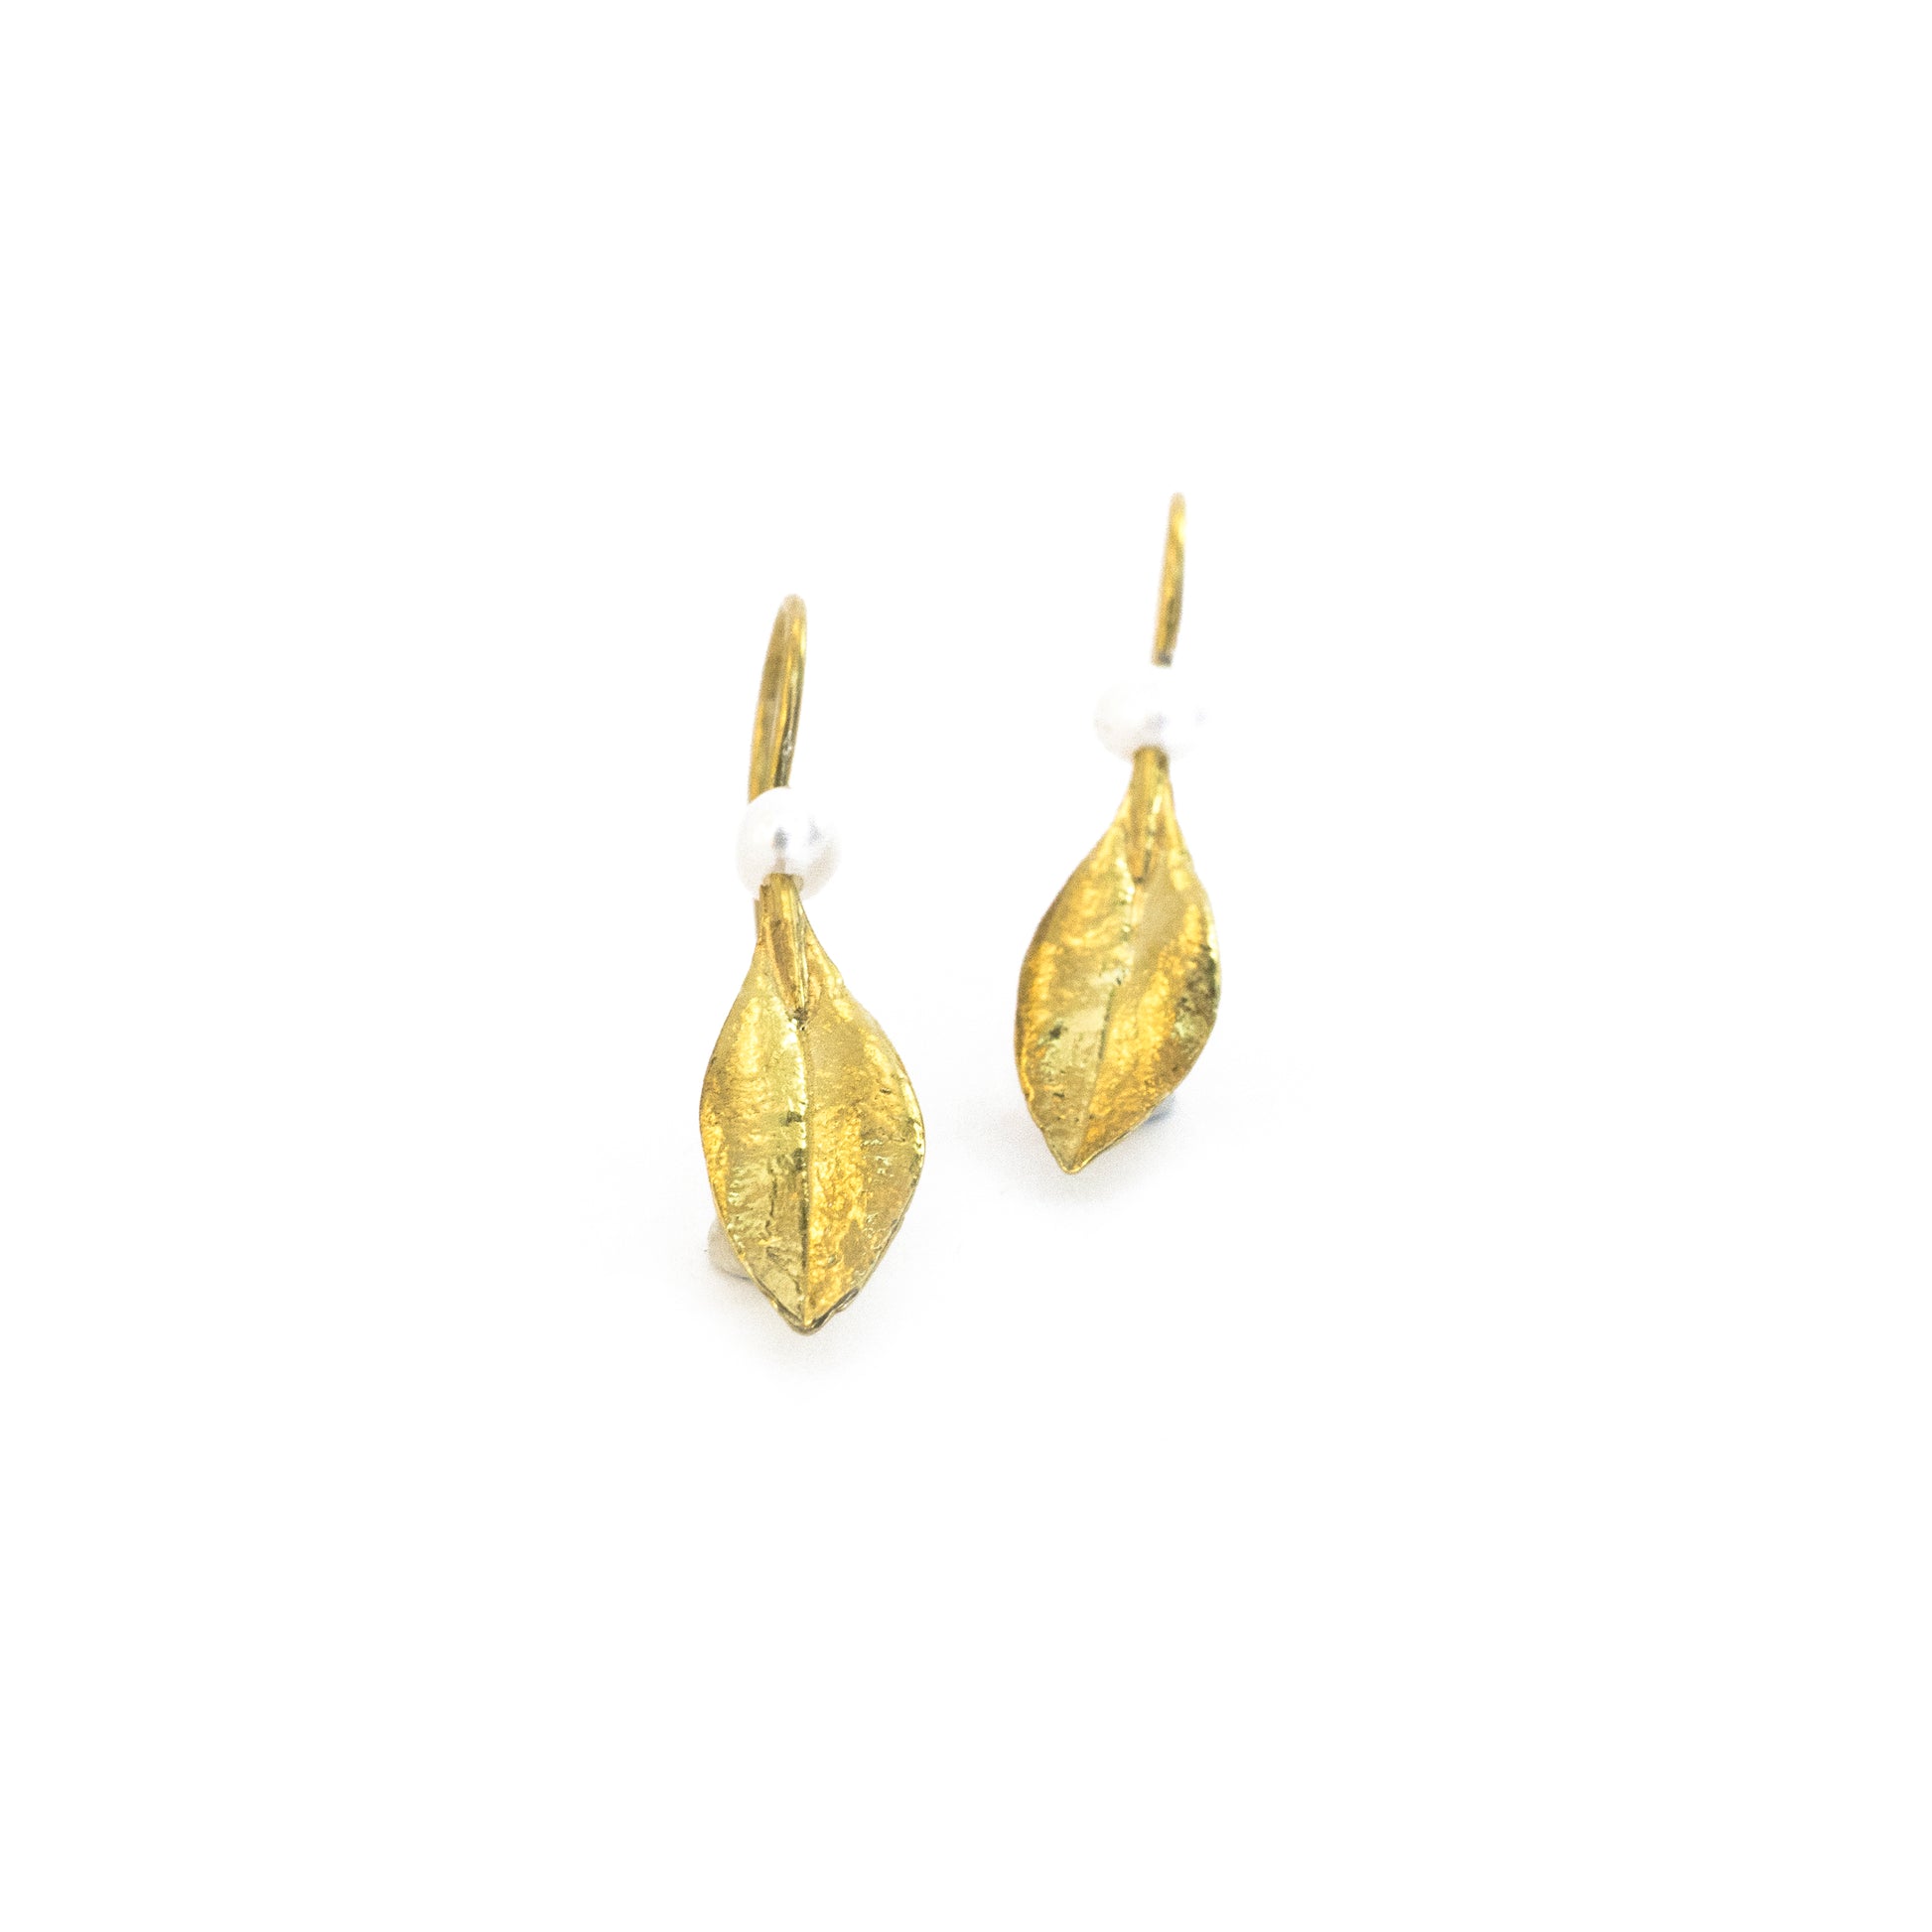 Exquisite Handcrafted 18K Gold Eugenia Earrings with a Beautifully Adorned Pearl atop Each Leaf - Unique Nature-Inspired Artisan Jewelry